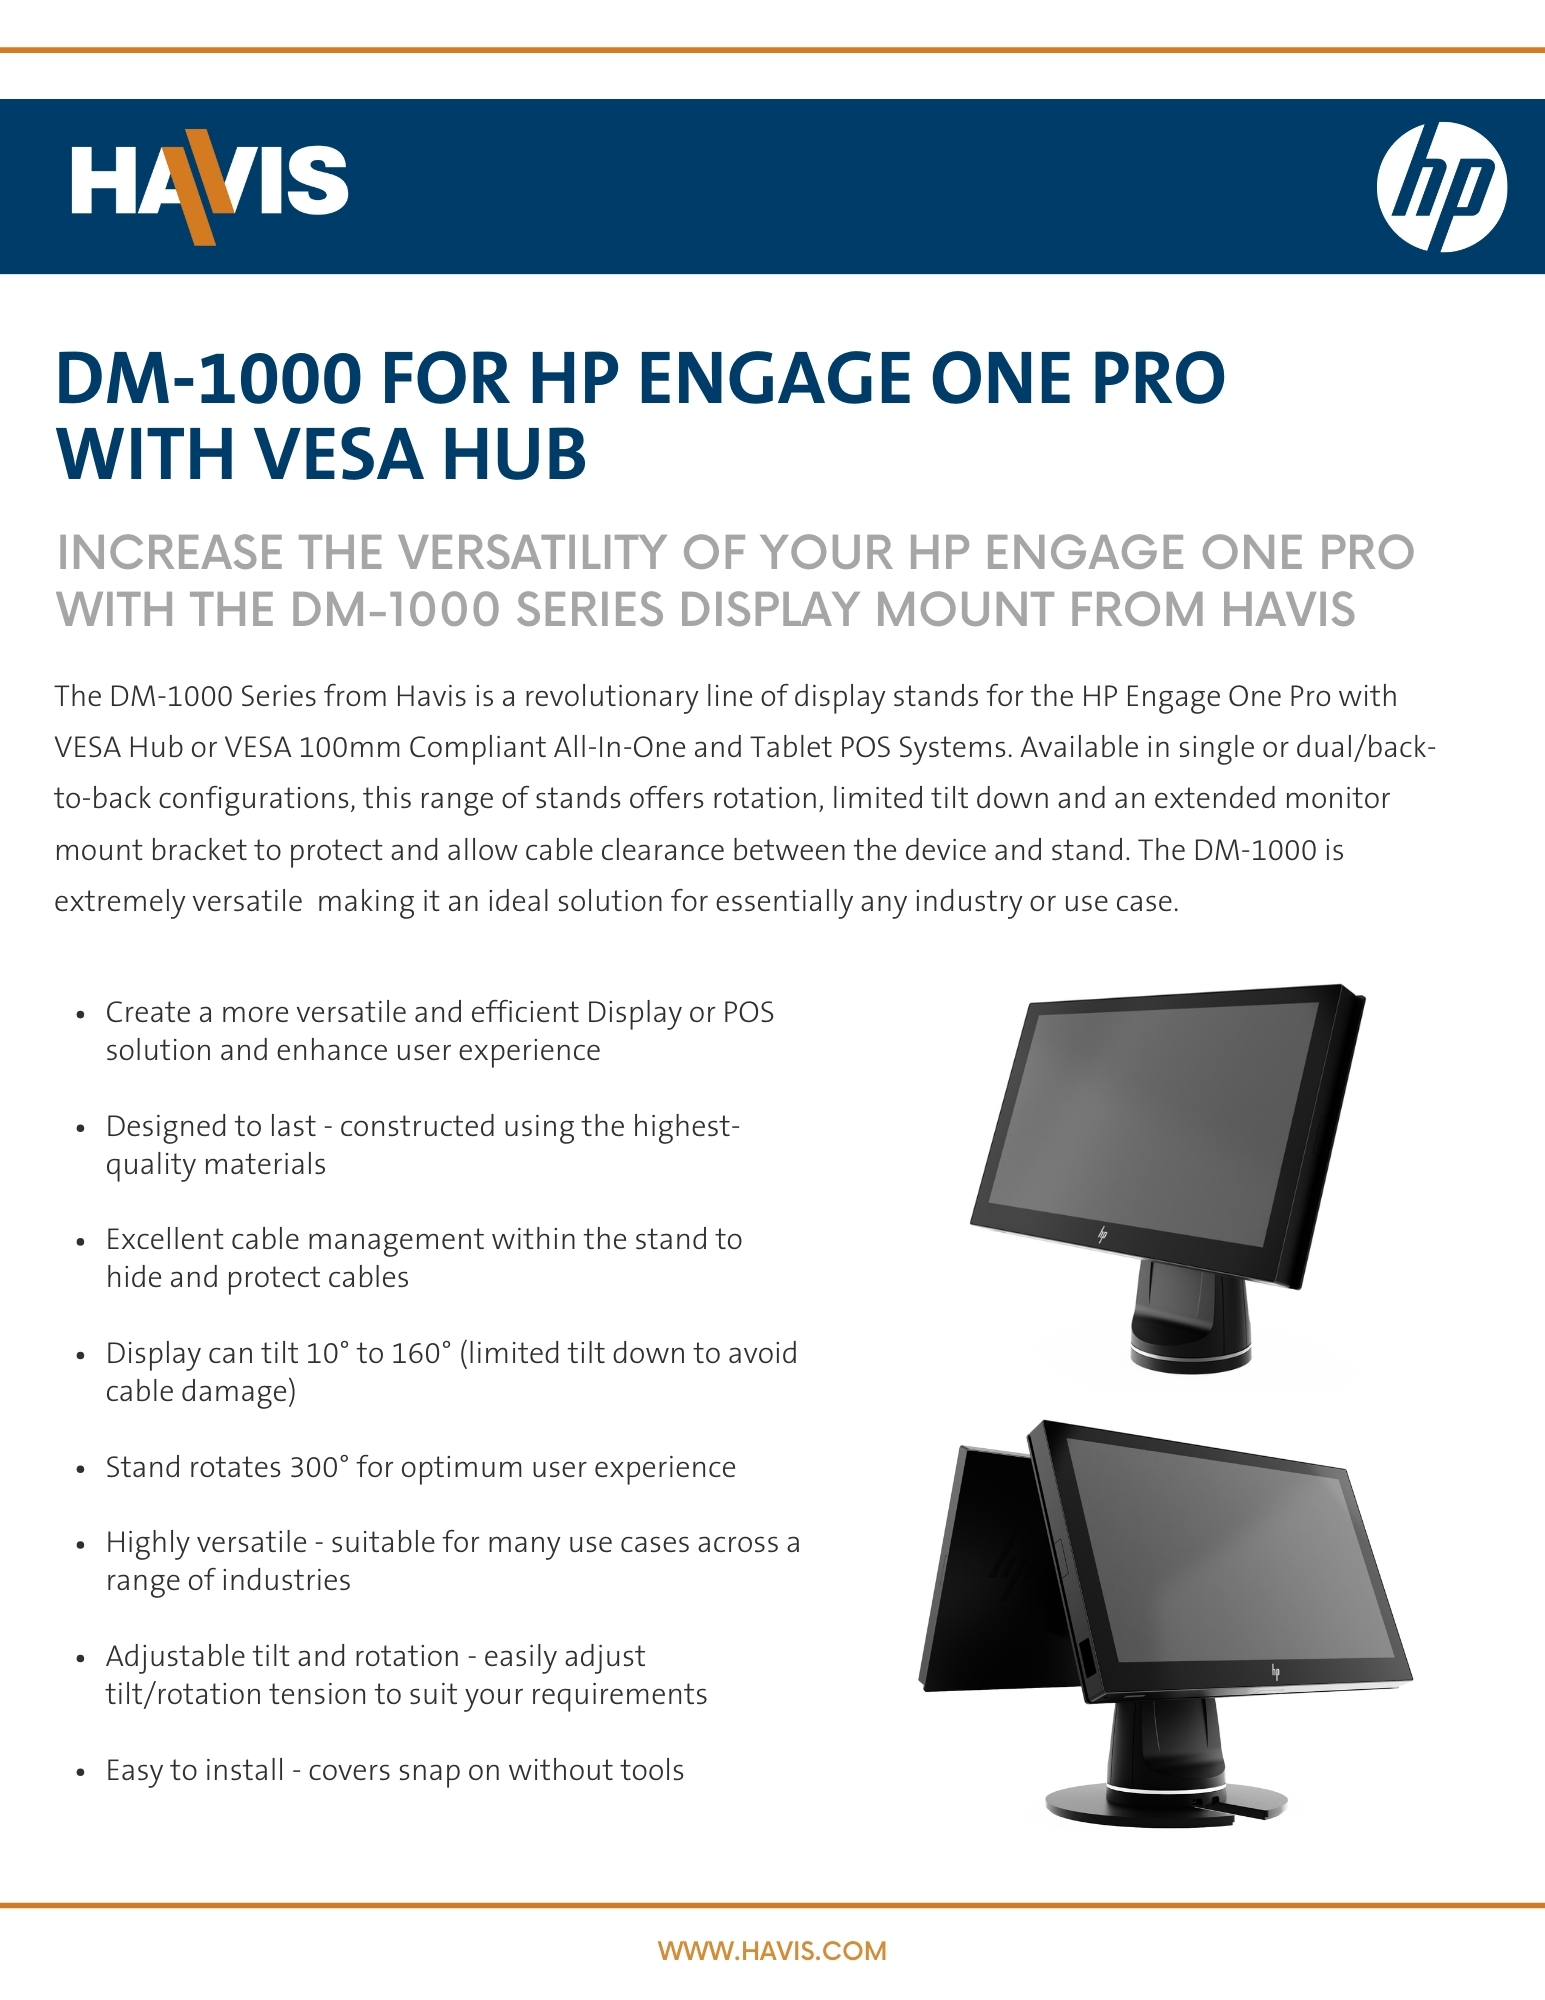 DM-1000 for HP Engage One Pro with VESA - Data Sheet